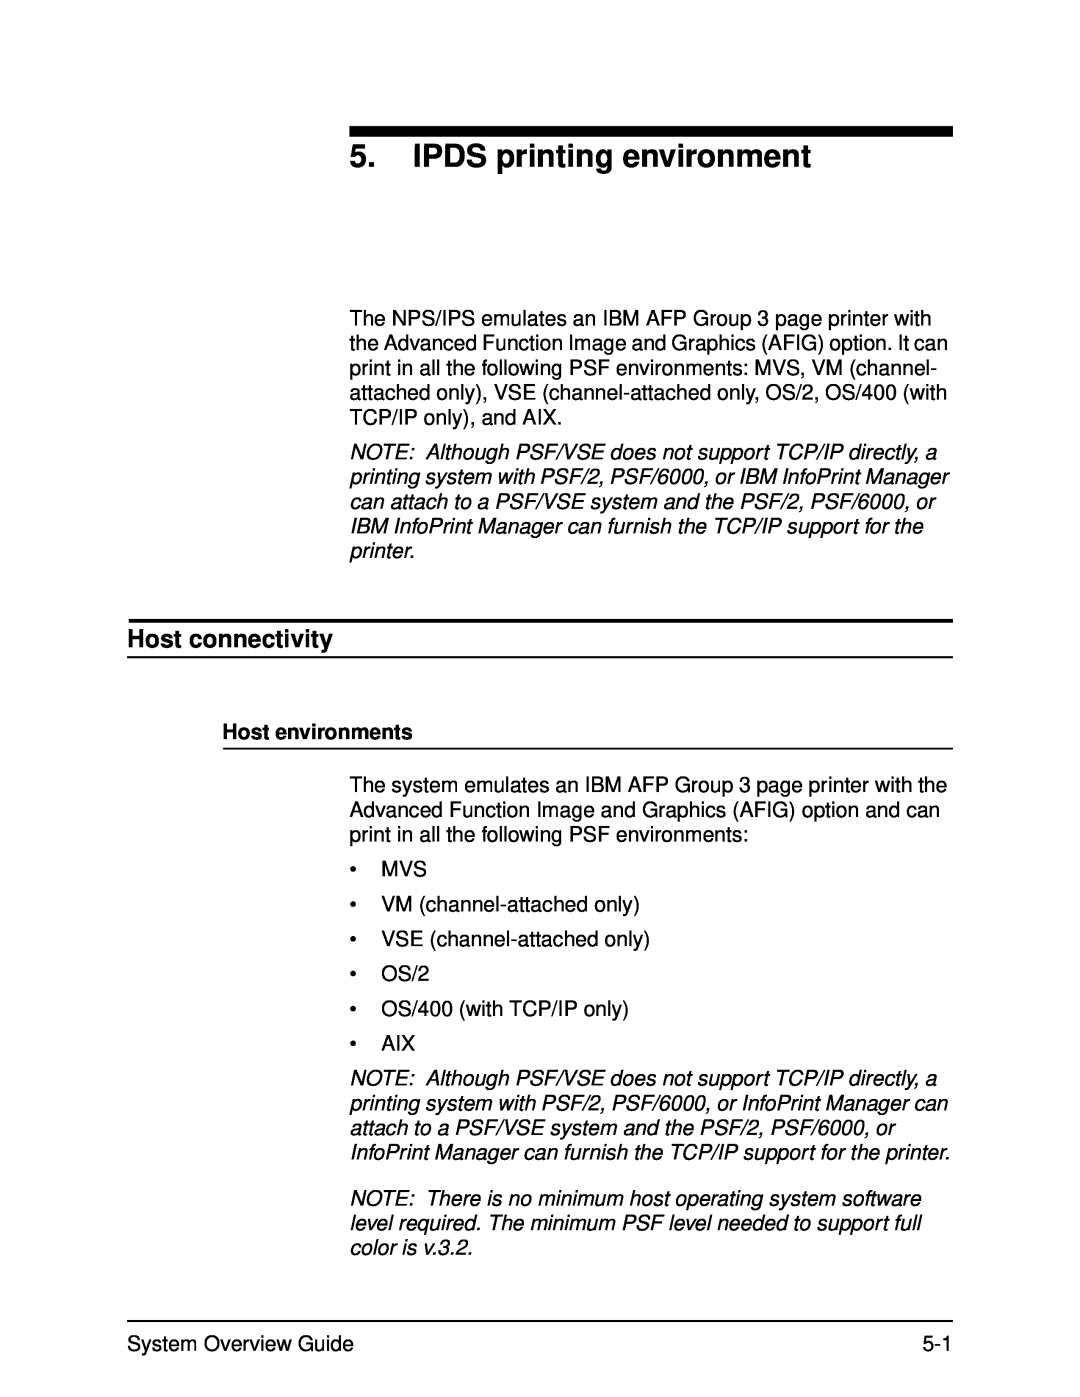 Xerox 4850, IPS, NPS, 4890, 92C manual IPDS printing environment, Host connectivity, Host environments 